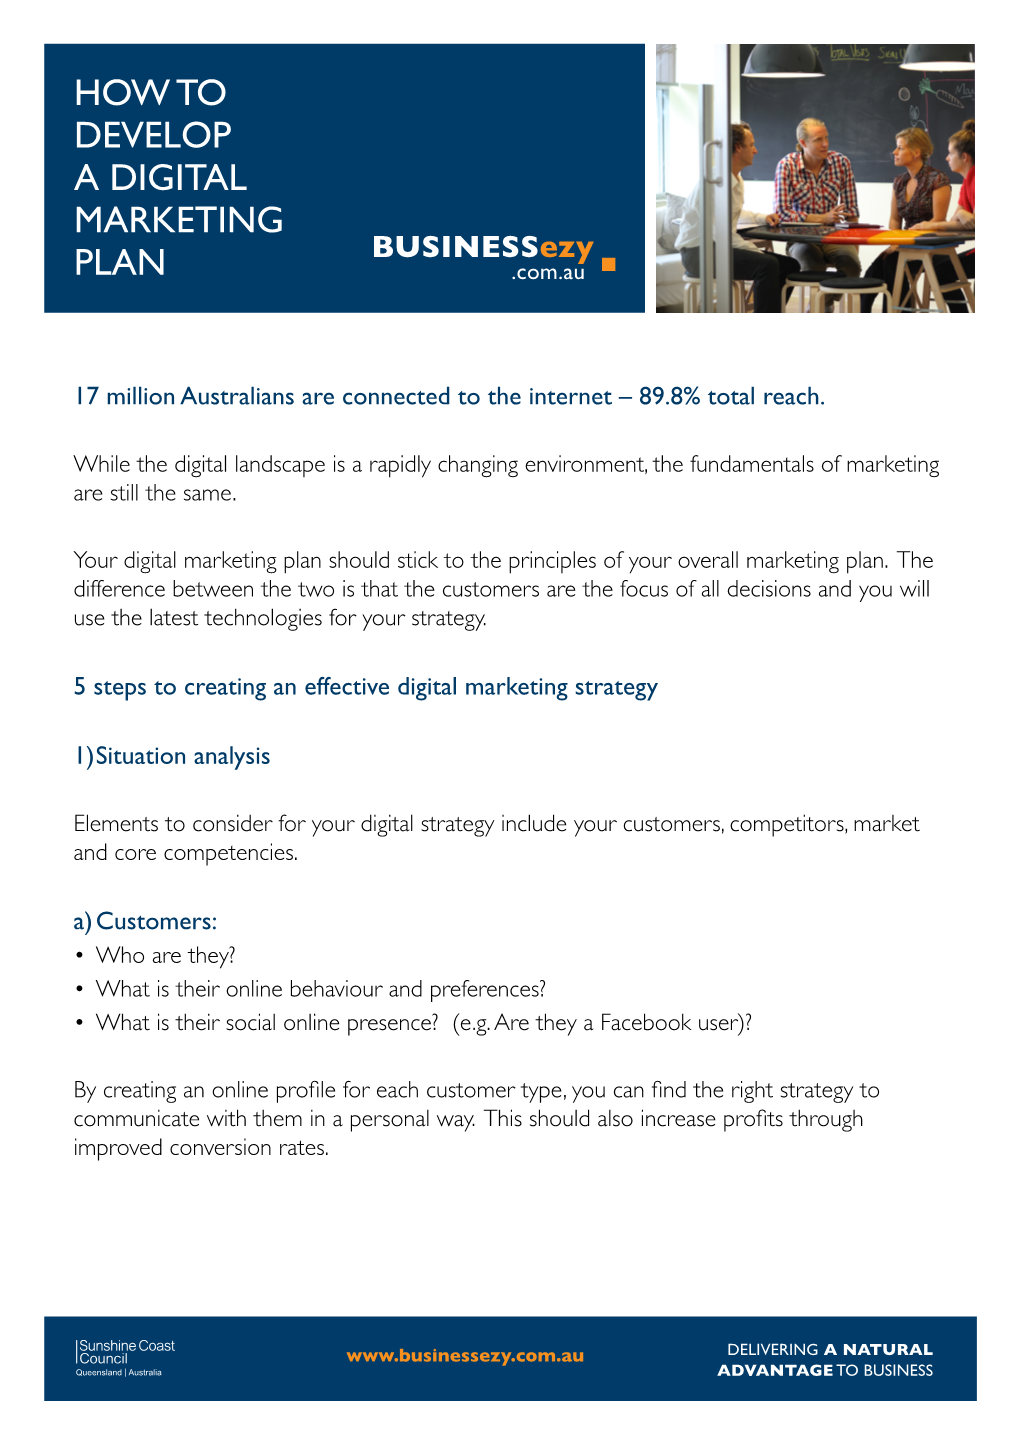 How to Develop a DIGITAL Marketing Plan